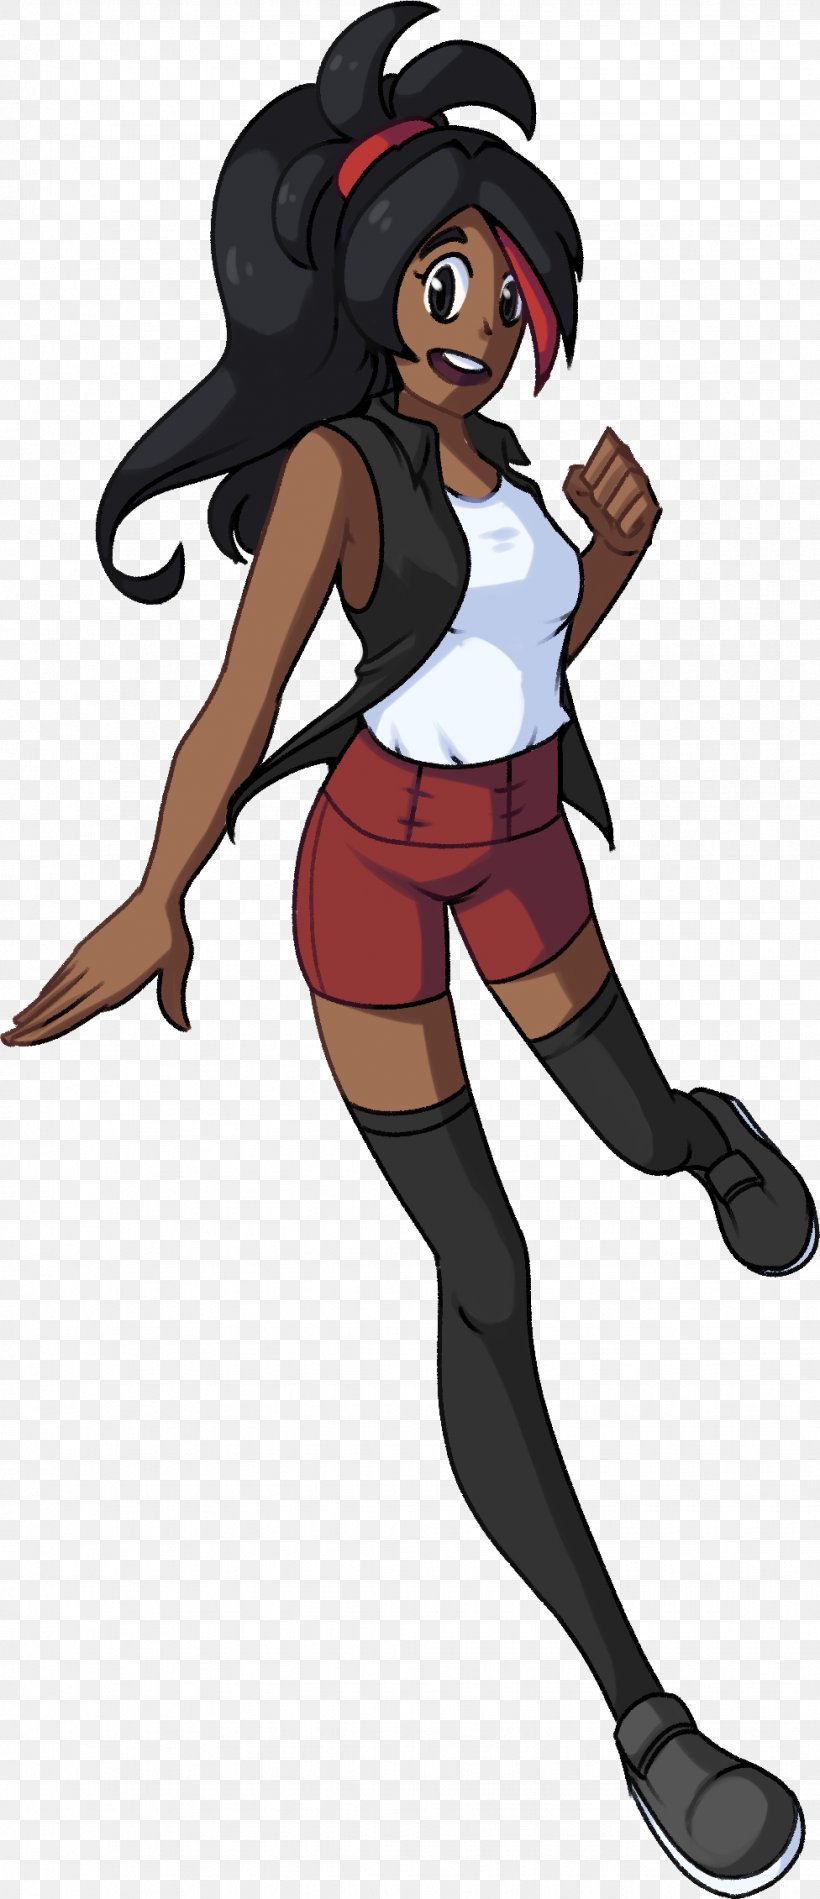 Pokémon Red And Blue Player Character Protagonist, PNG, 976x2261px, Character, Art, Cartoon, Clothing, Costume Design Download Free